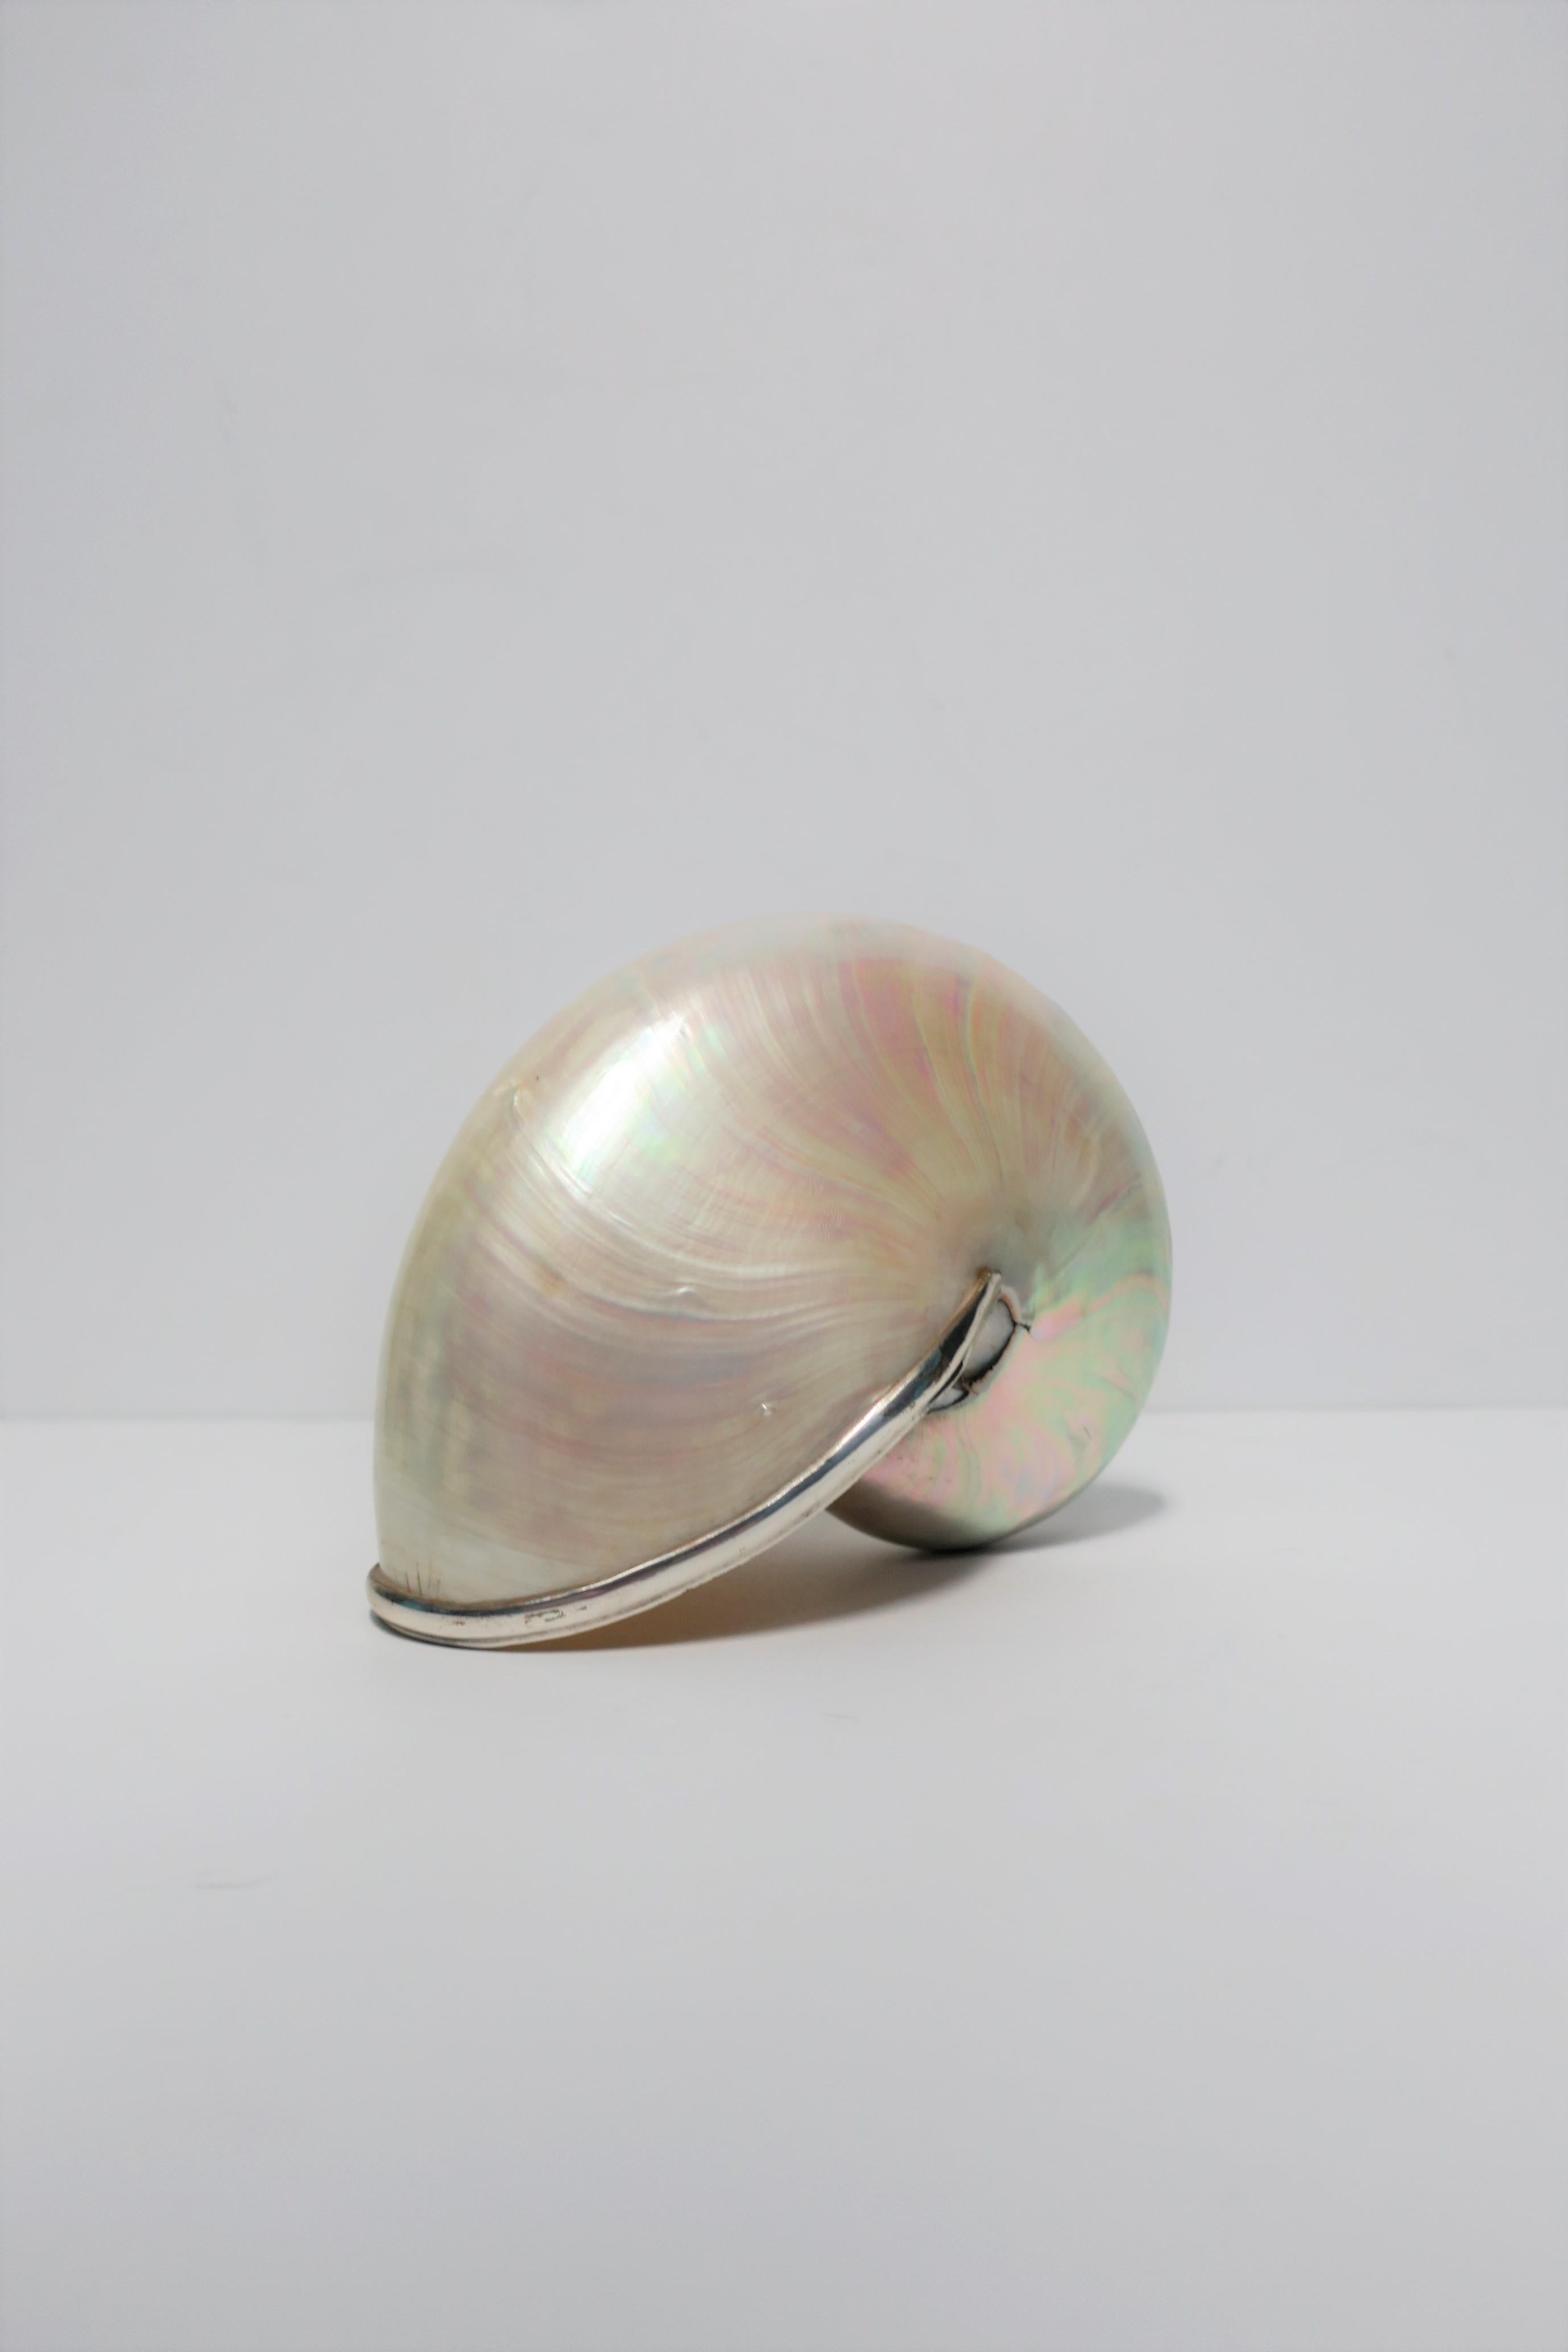 A very beautiful white mother-of-pearl nautilus seashell trimmed in silver metal. Seashell is a nice size measuring: 3.75